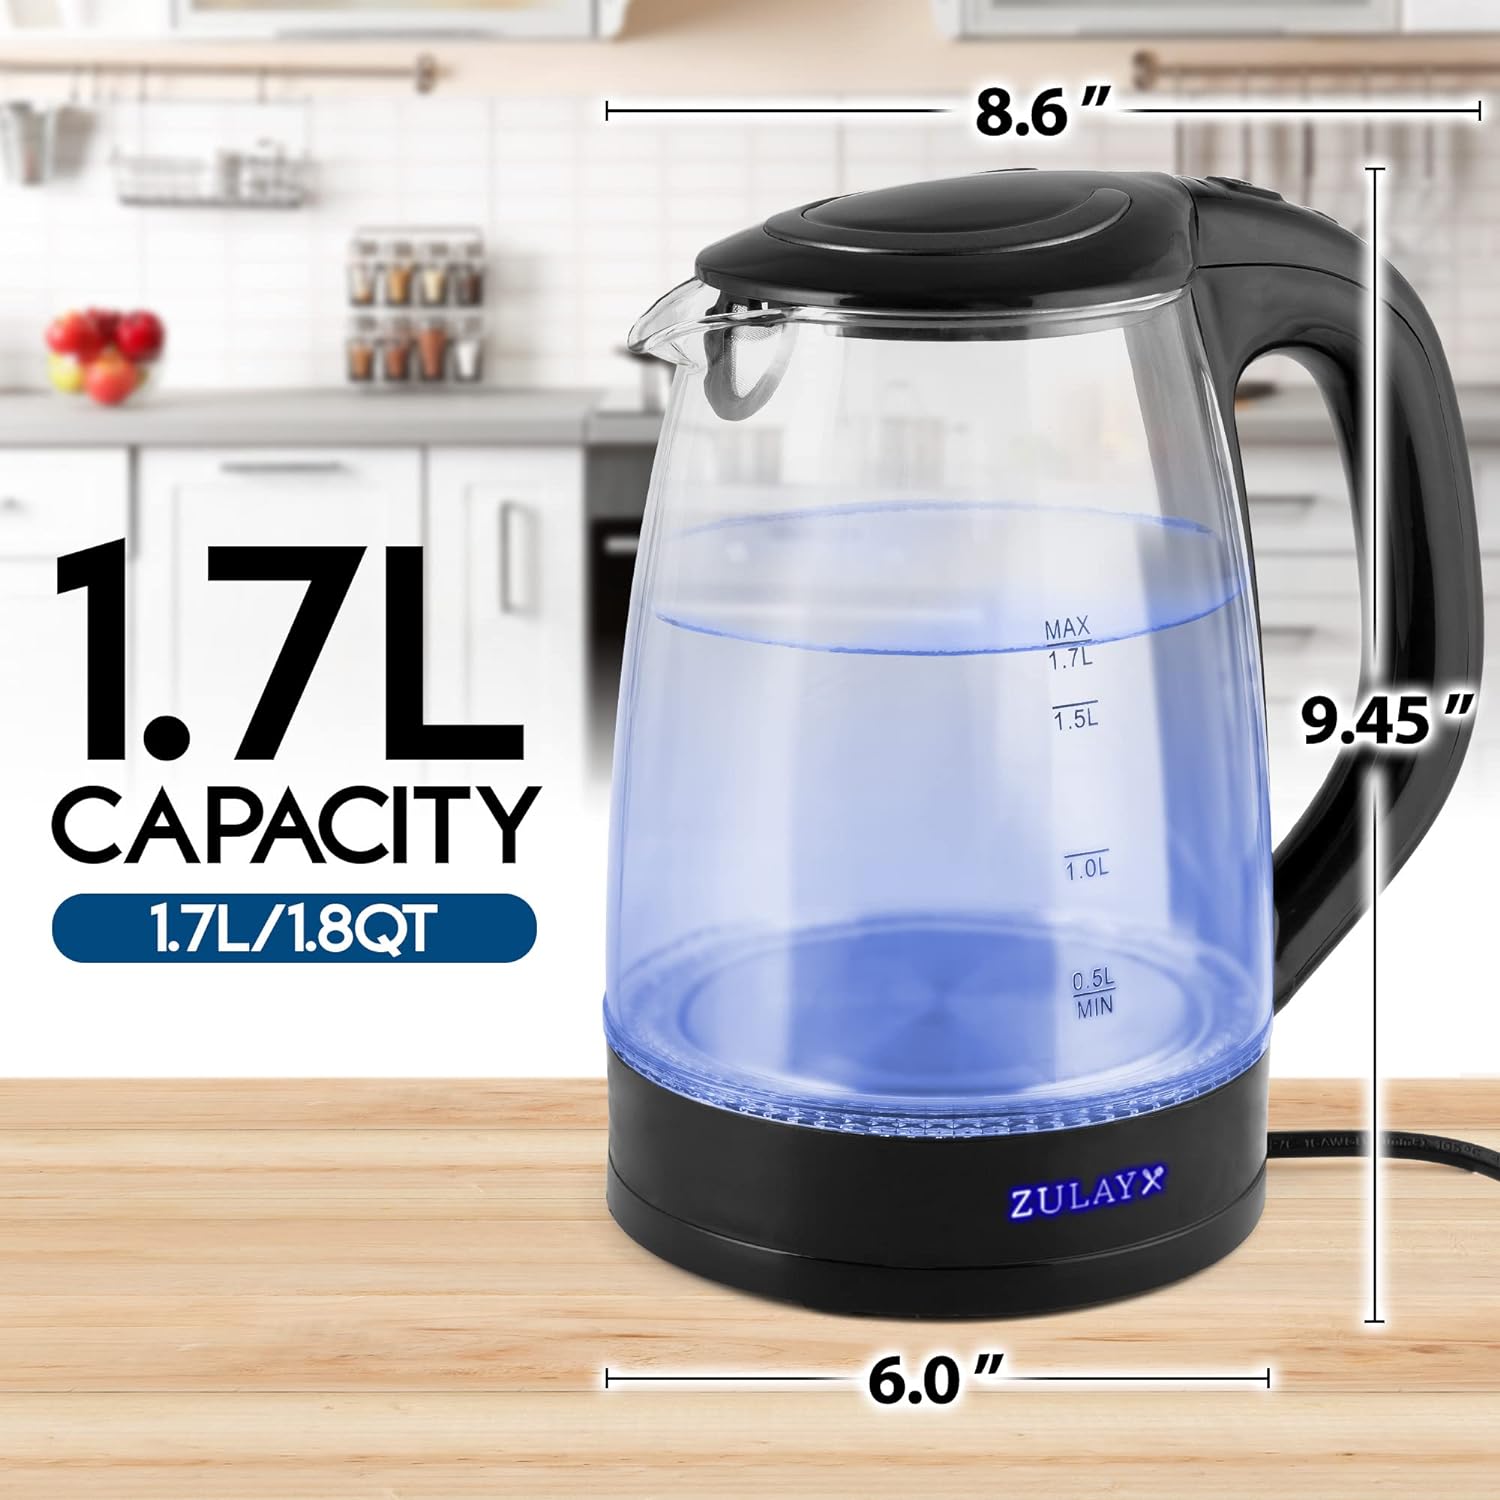 Electric Kettle, 1.7L Glass Boiler Electric Tea Kettle with Blue LED  Indicator